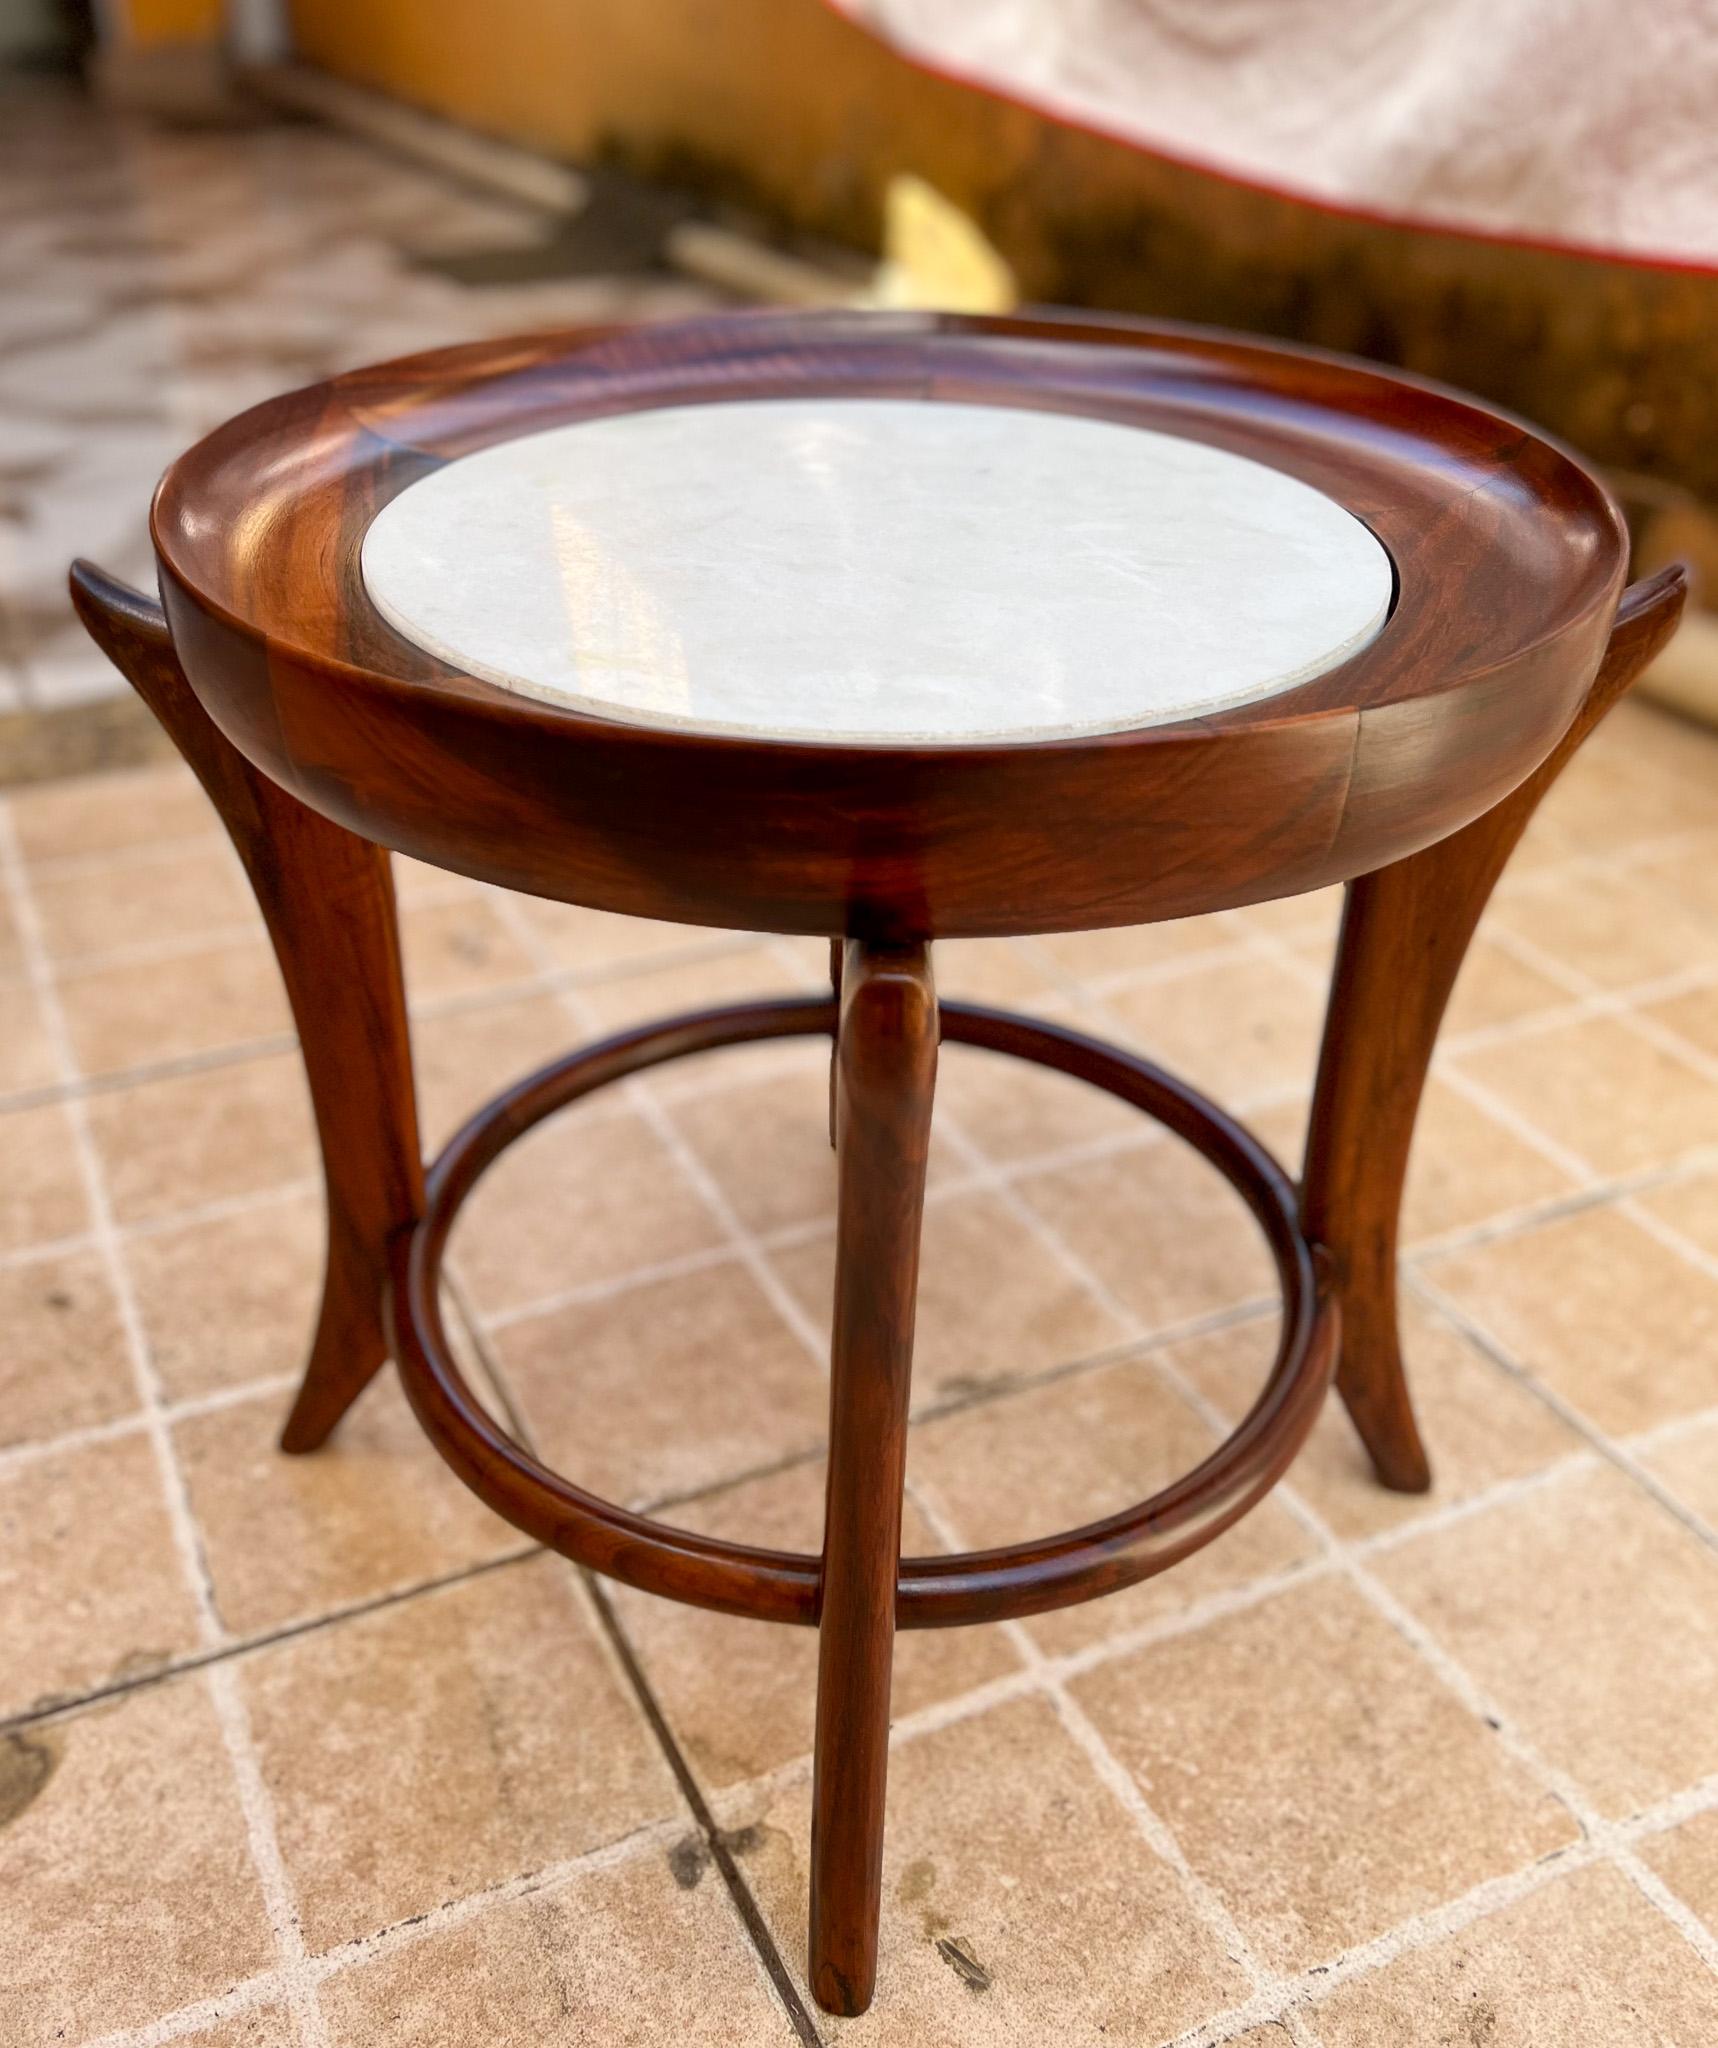 Available today, Giuseppe Scapinelli’s iconic Maracanã coffee table is made of Brazilian Rosewood, as known as Jacaranda and marble. The top has a circular wood base that holds the marble, giving a futuristic look when seen from above. The four